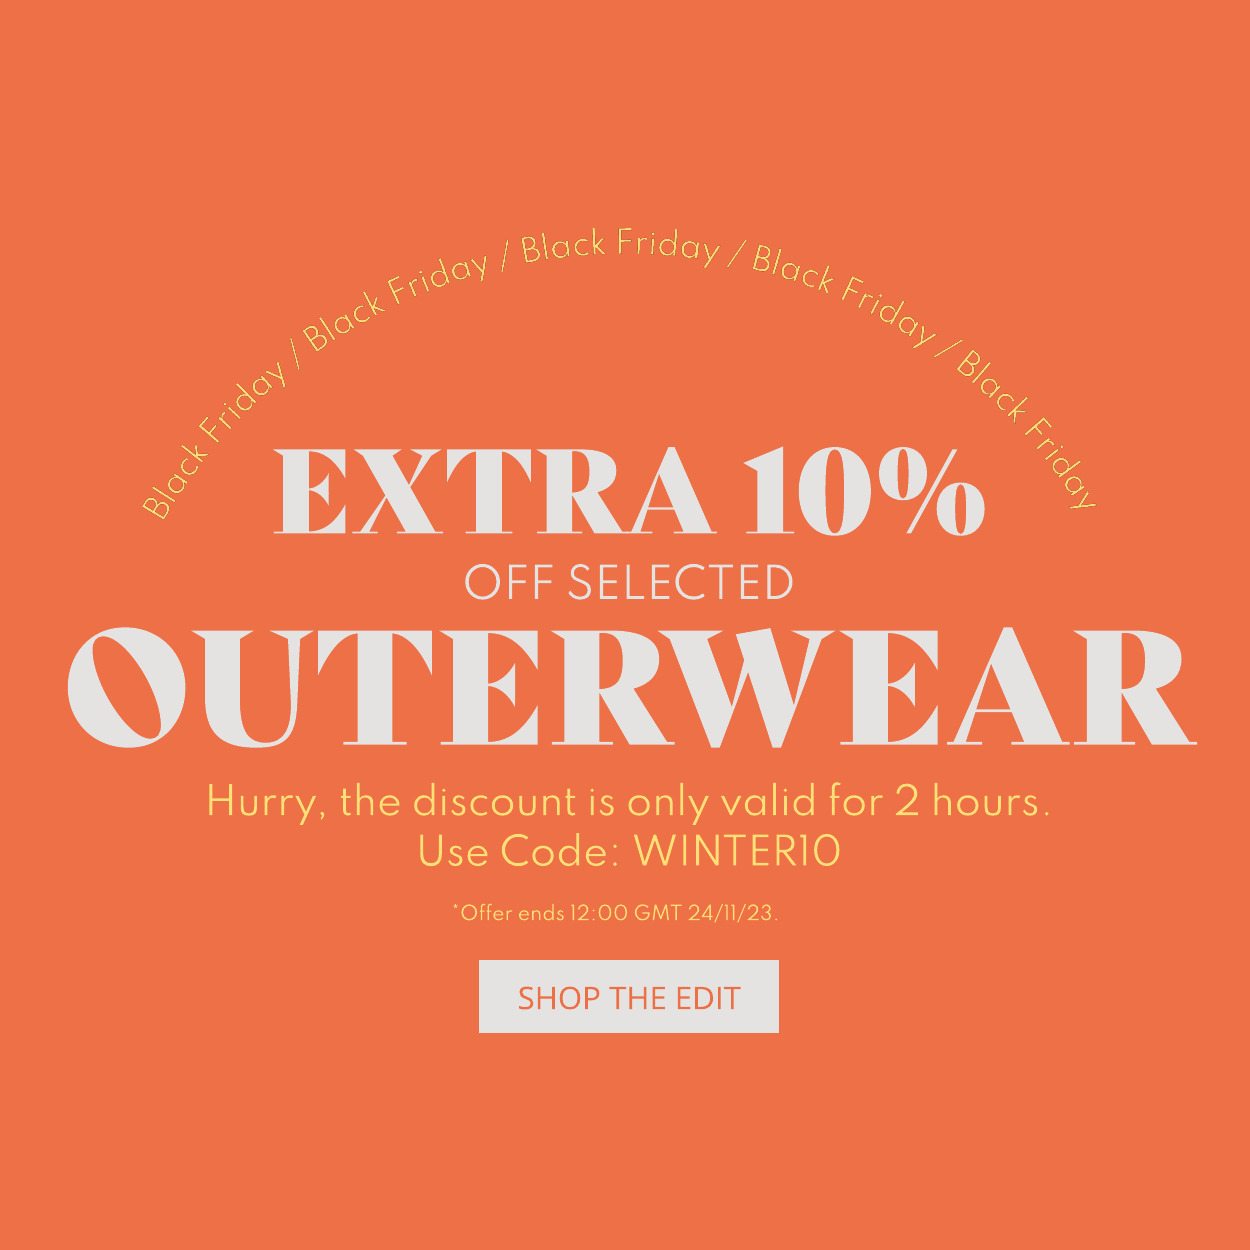 Extra 10% off when you use the code WINTER10